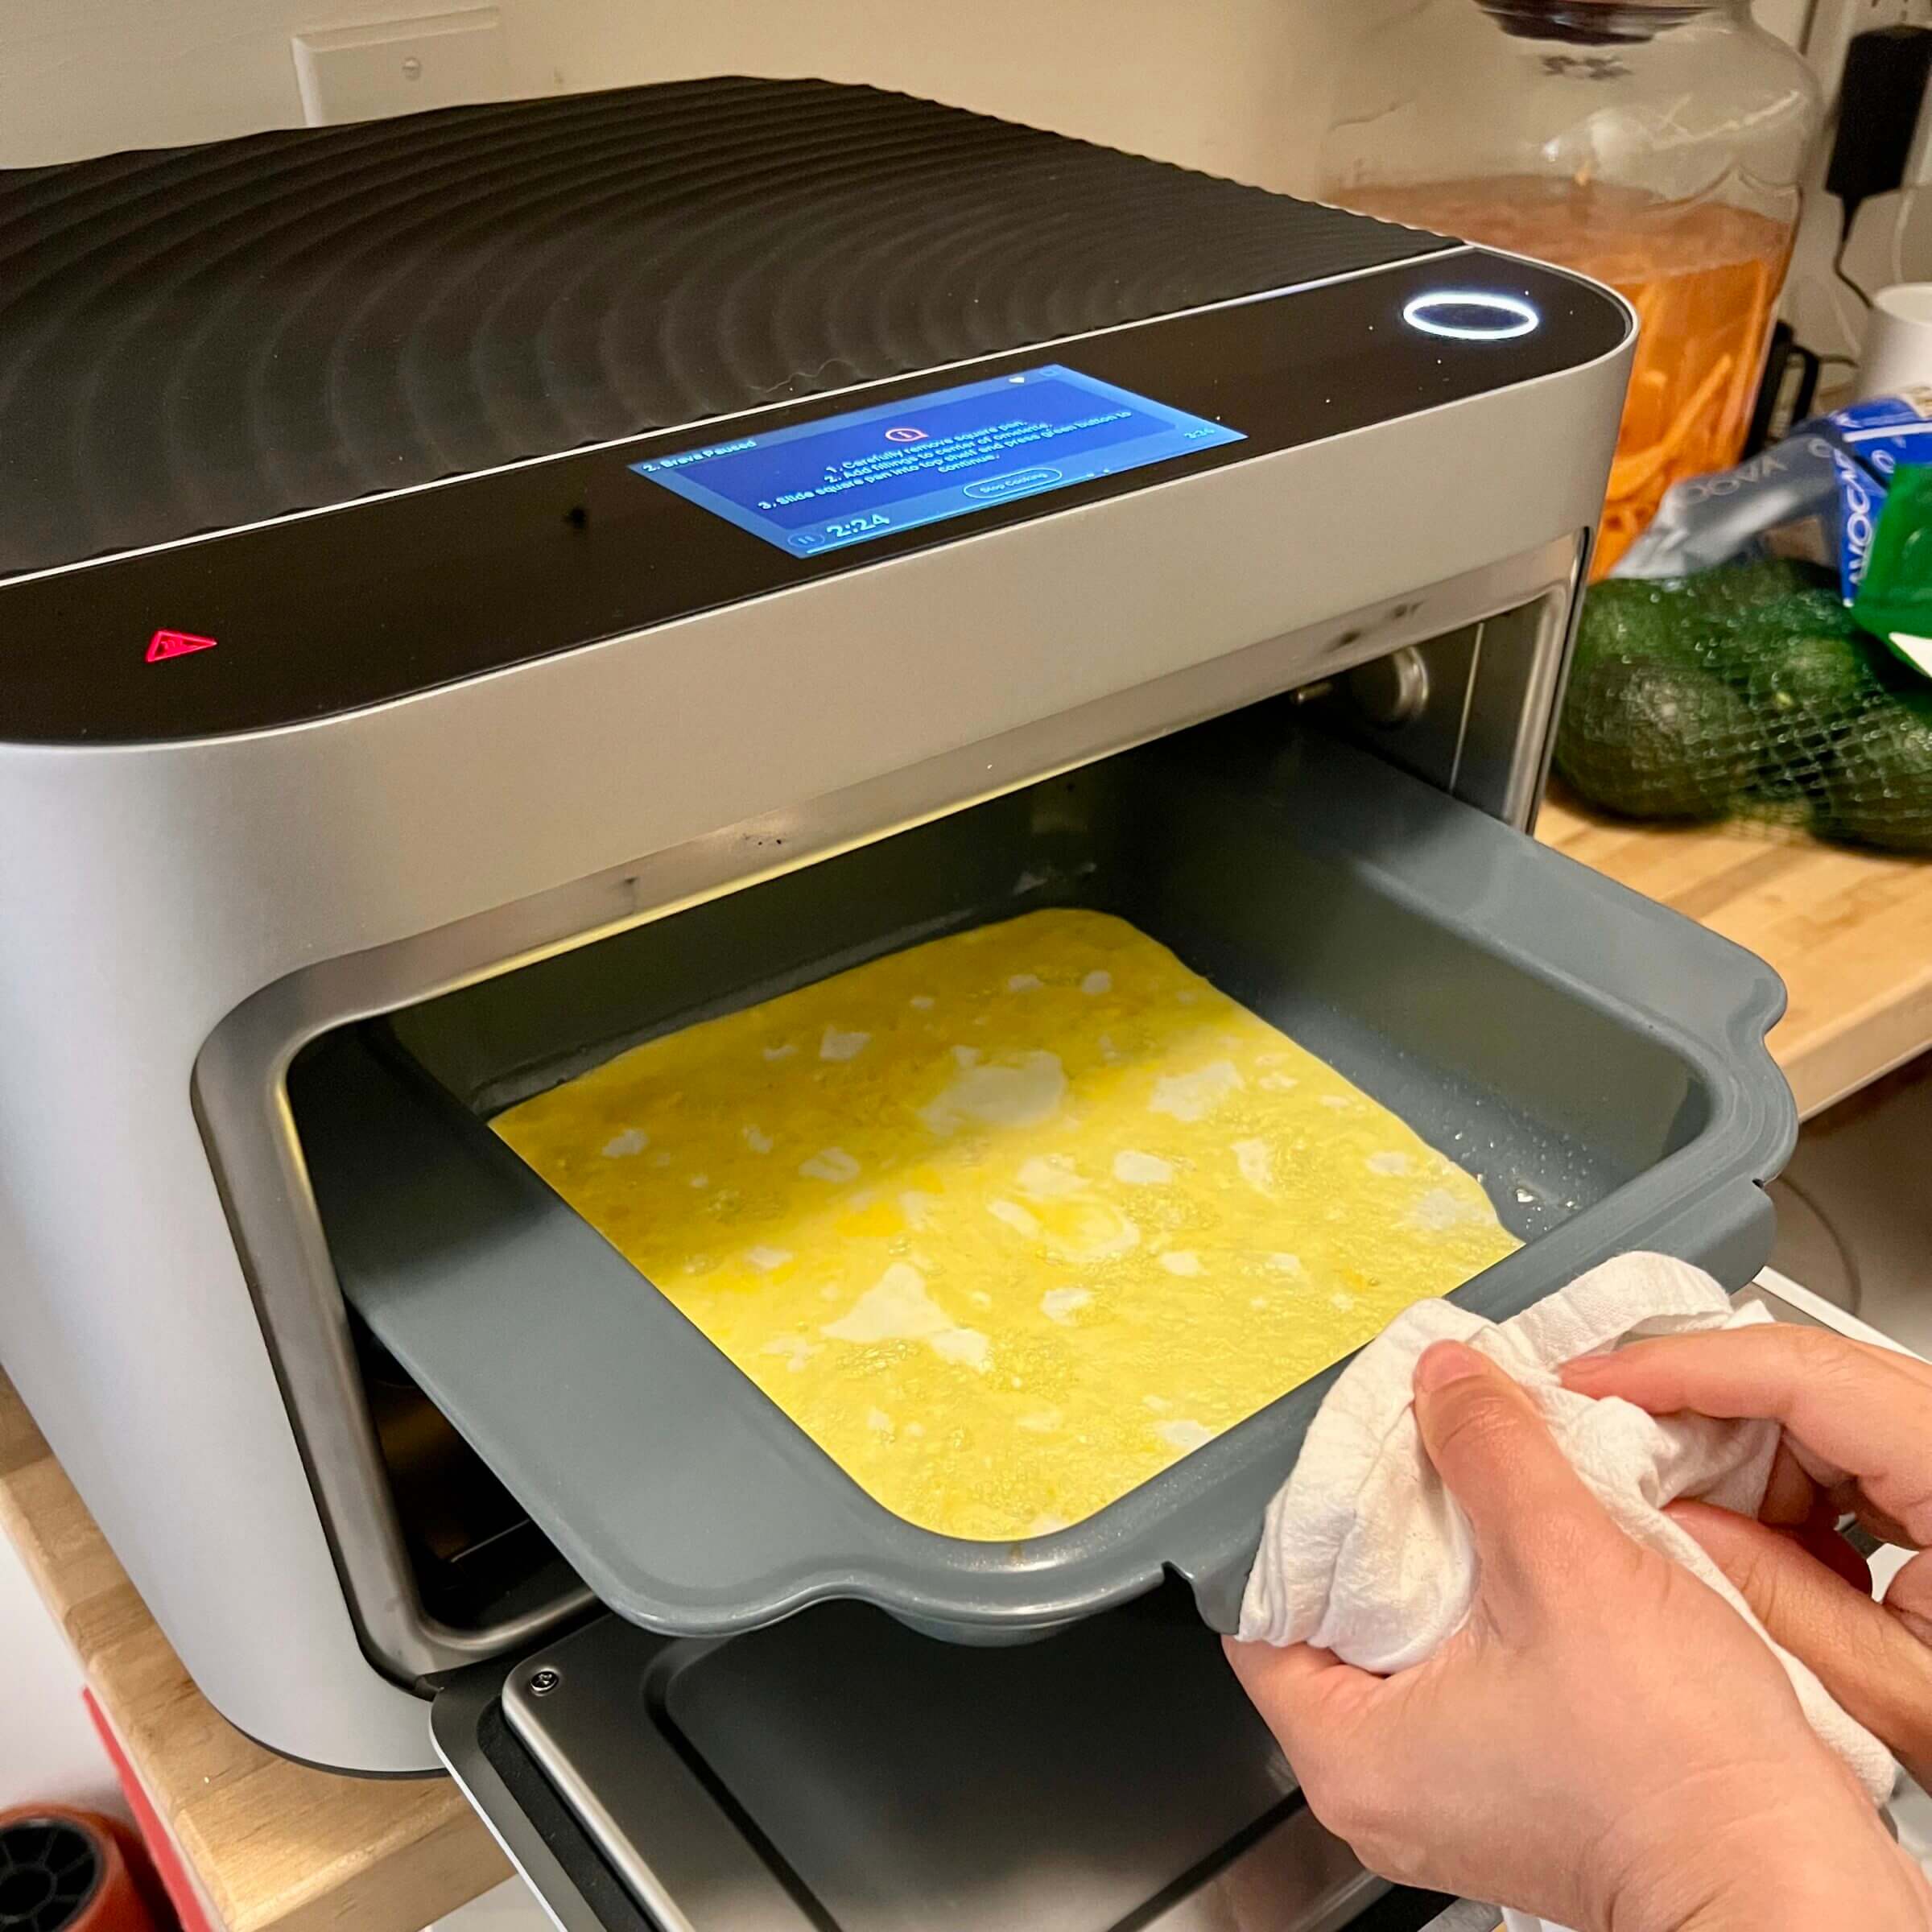 https://michaelkummer.com/wp-content/uploads/2022/12/Our-first-attempts-at-making-omeletes-in-the-Brava-using-the-square-pan.jpeg